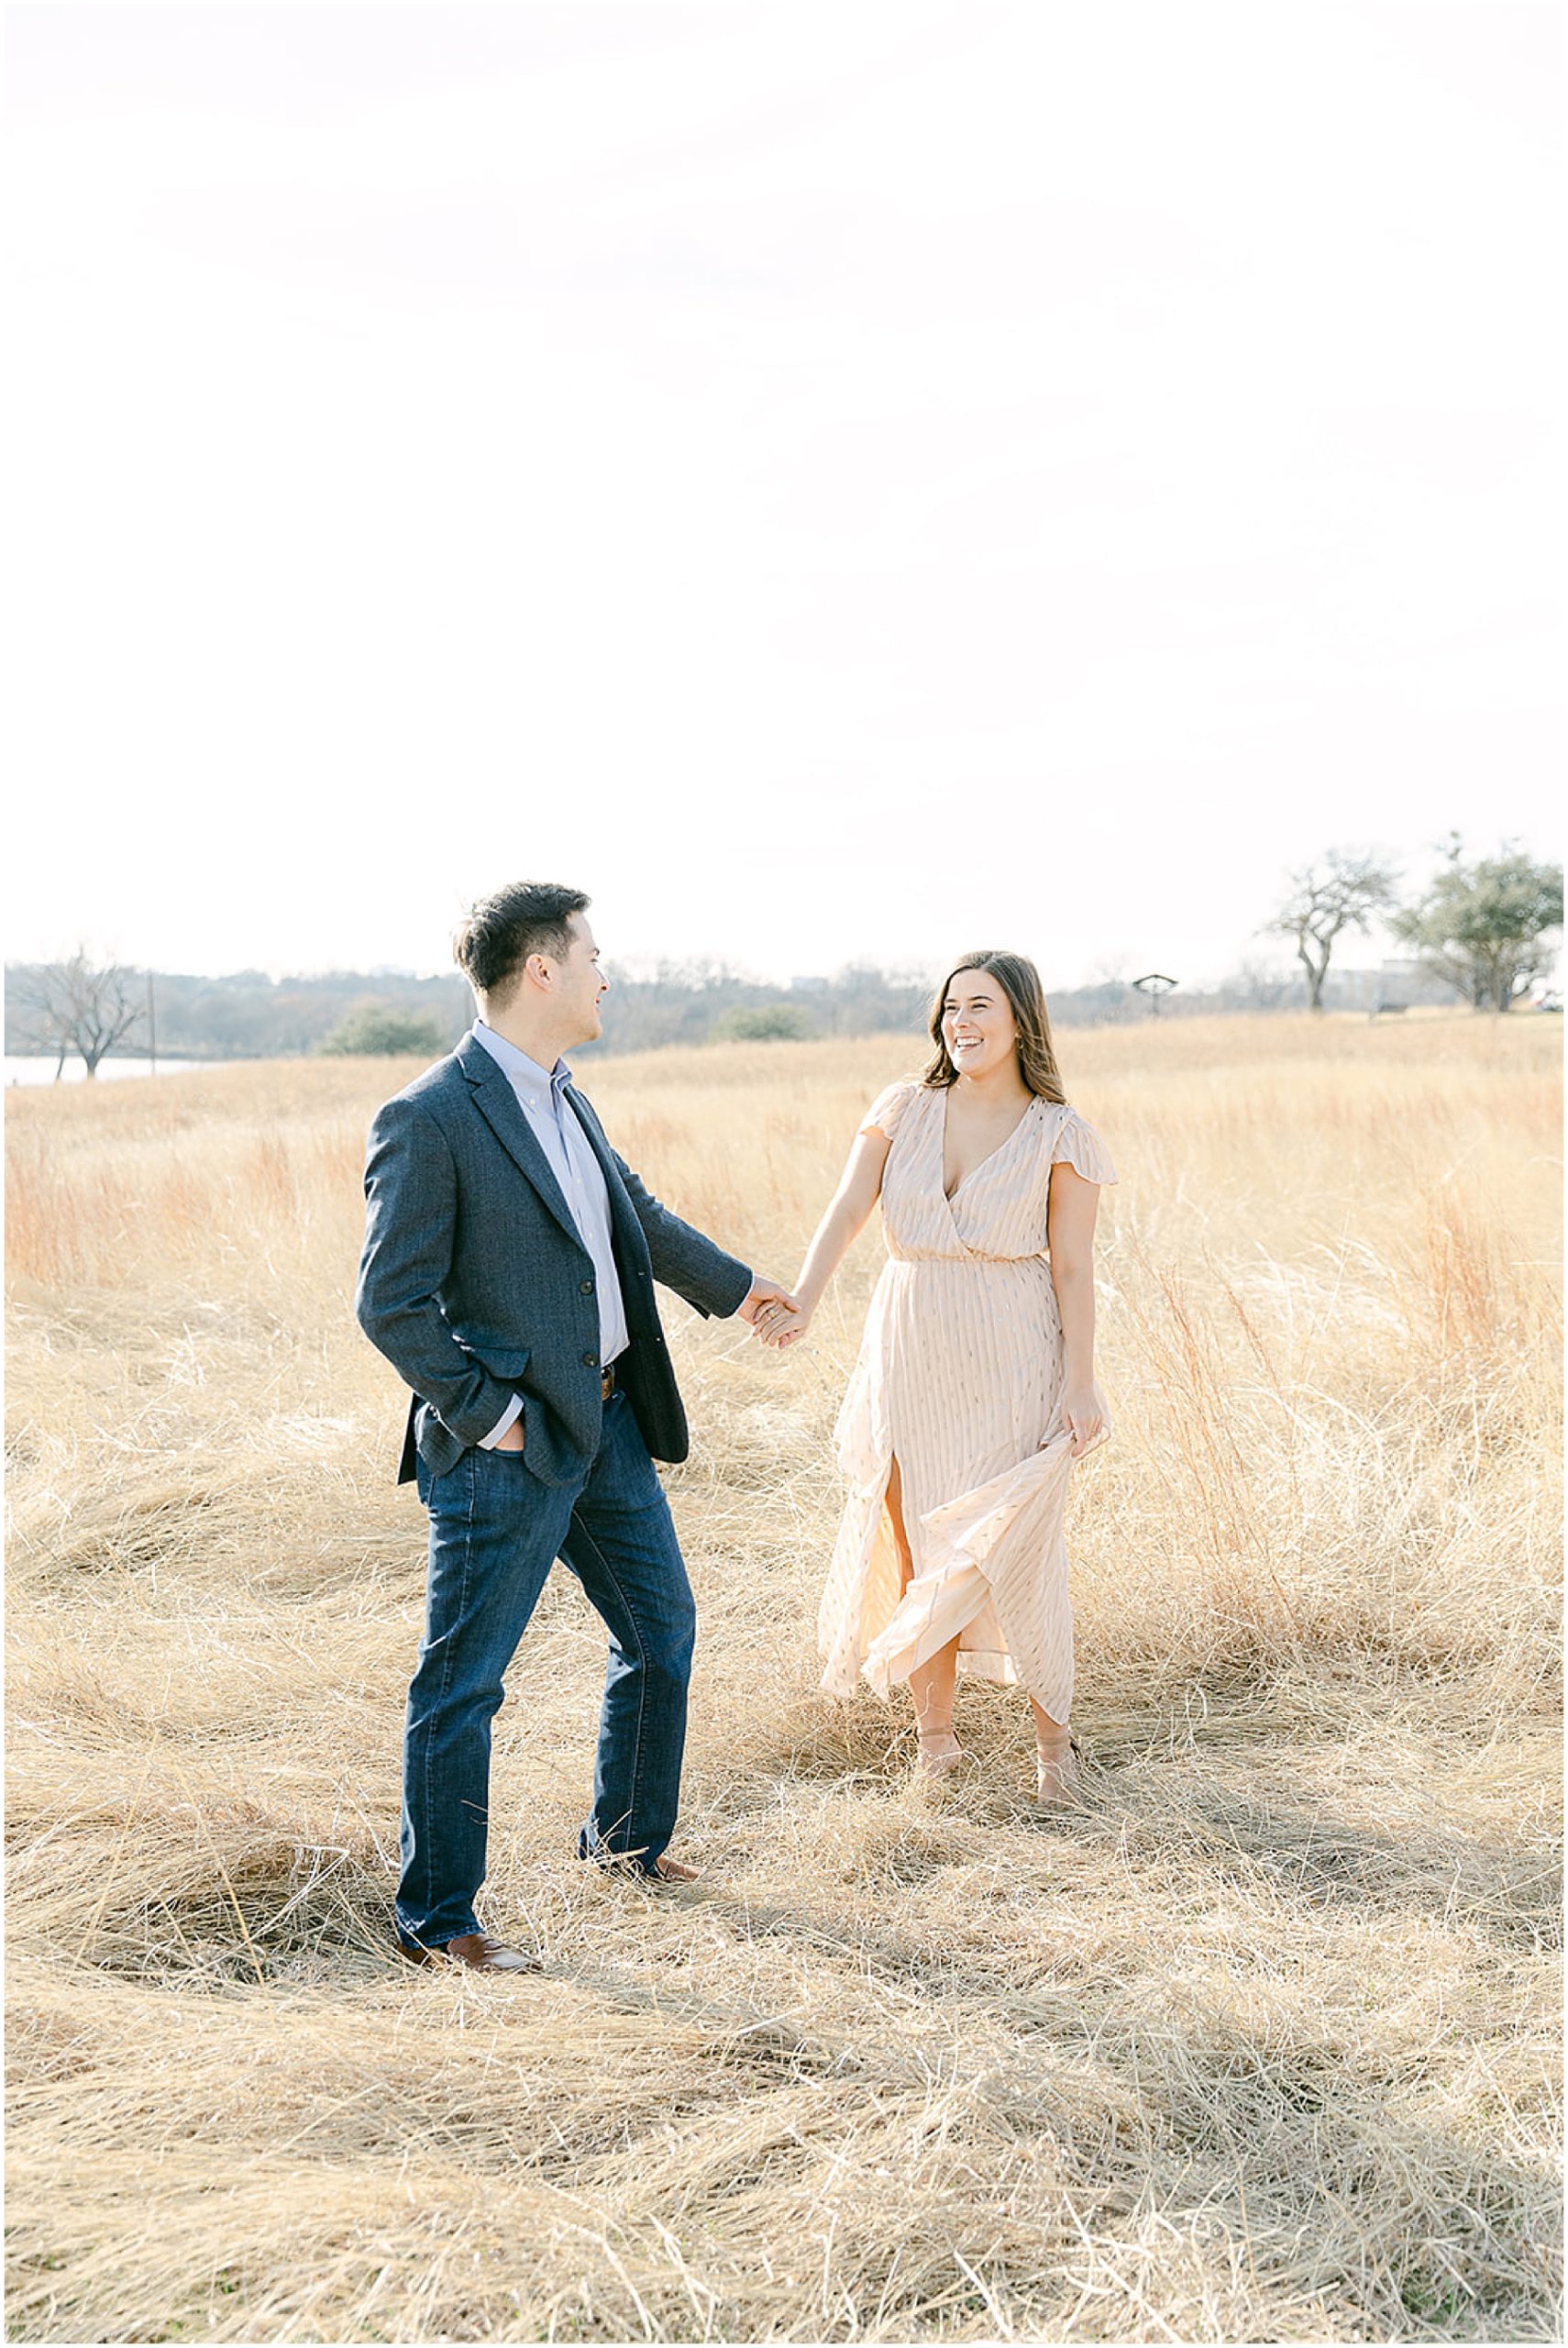 Aggie Engagement session at white rock lake in dallas/ft. worth, texas with photographer Willow Vogt Photography